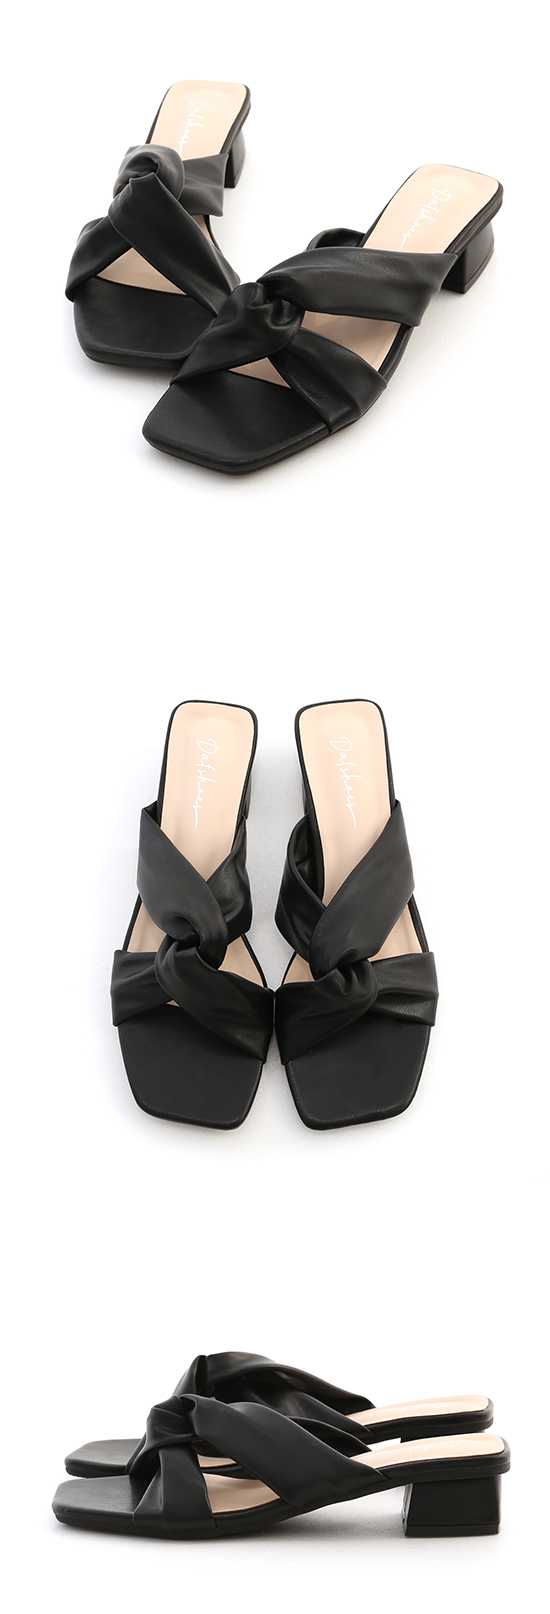 Knotted Square Toe Low Heel Sandals Black